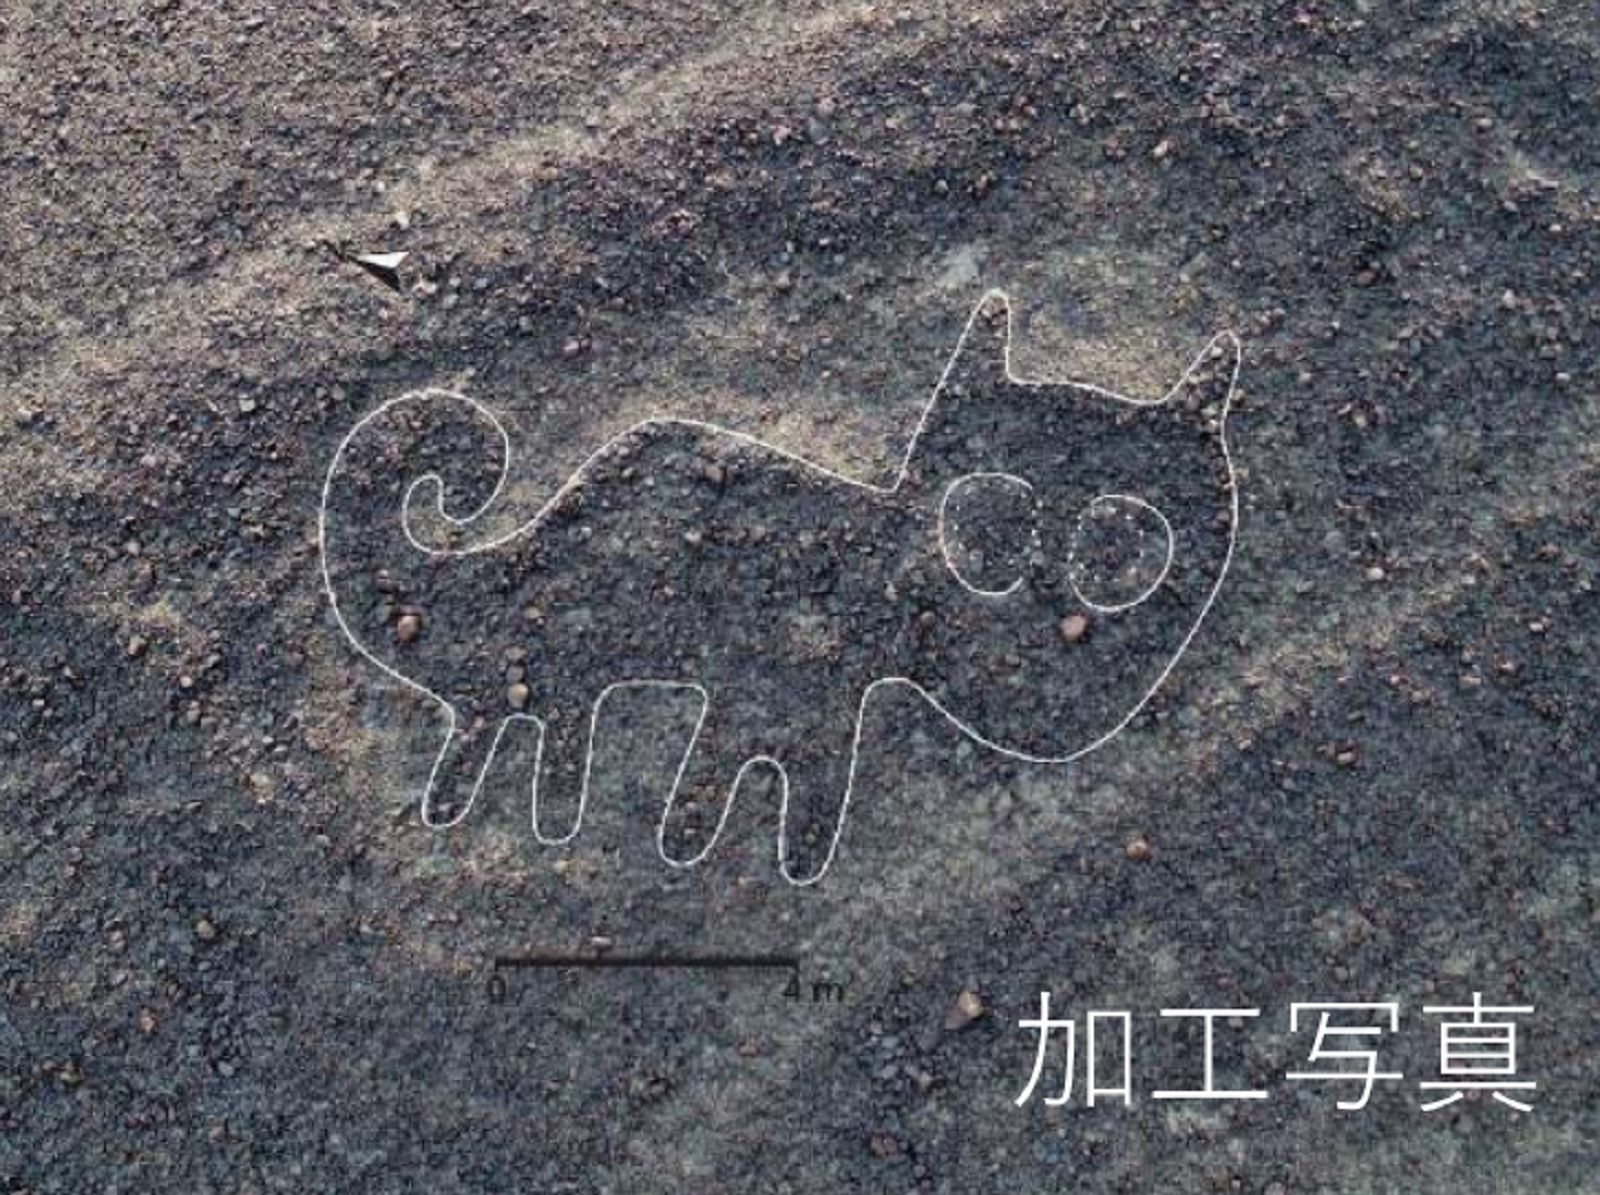 Scientists use IBM AI to discover mysterious drawings in Peru image 16